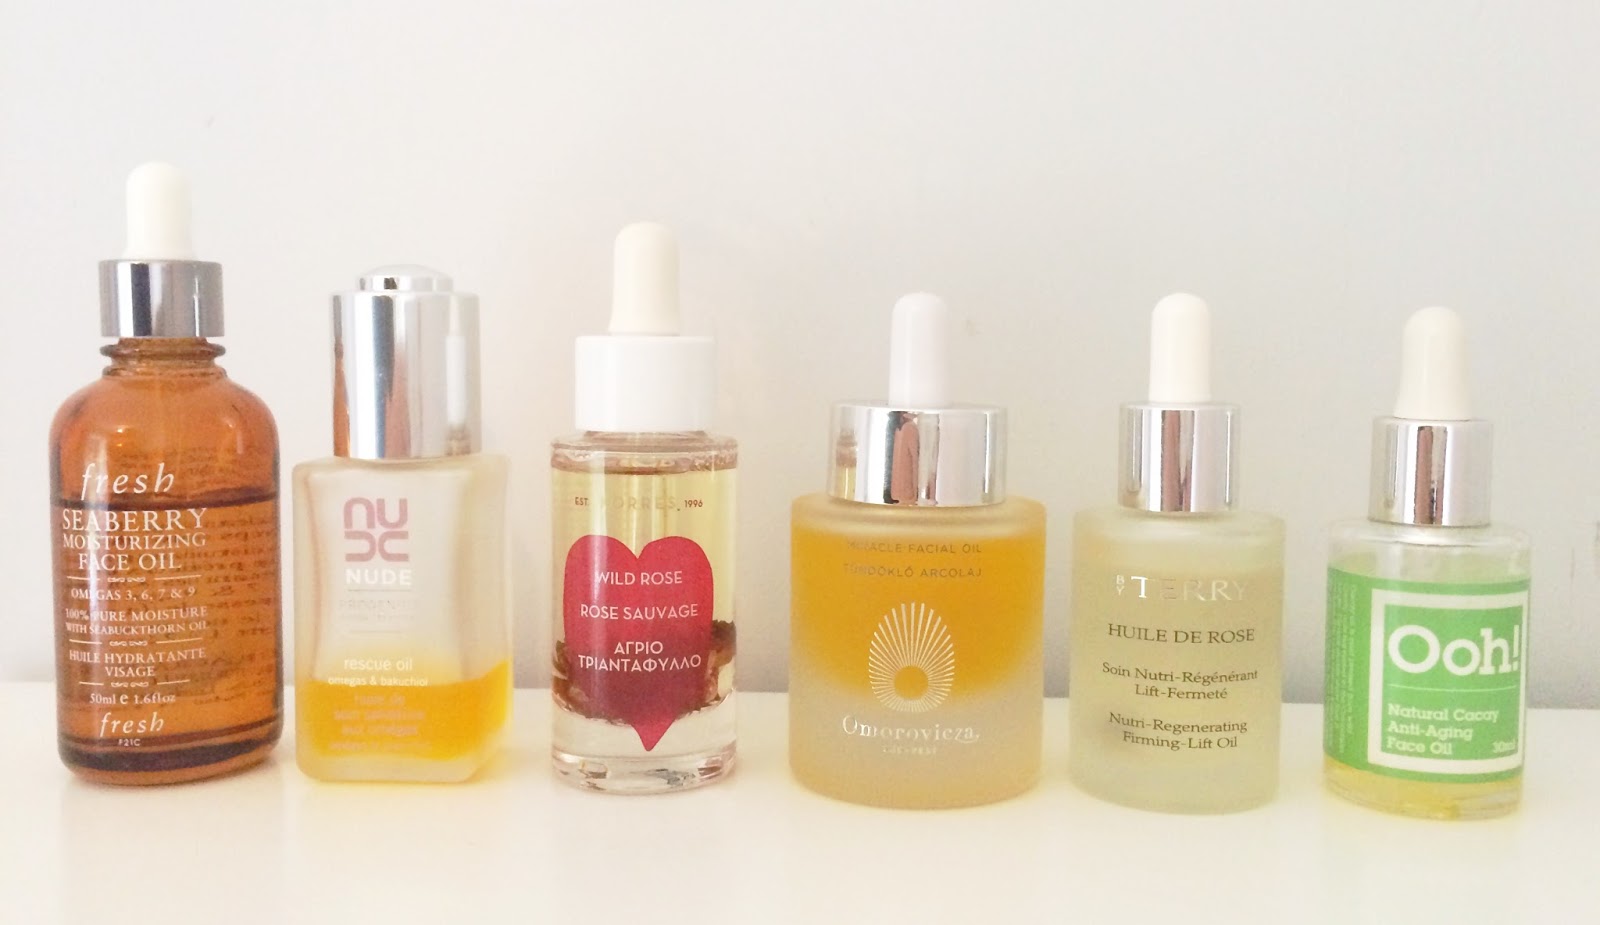 Face oils, Omorovicza Miracle Facial Oil, Fresh Seaberry Moisturizing Face Oil, Nude Rescue Oil, Korres Wild Rose Oil, By Terry Huile De Rose, Oils of Heaven Natural Cacay Anti-Aging Oil